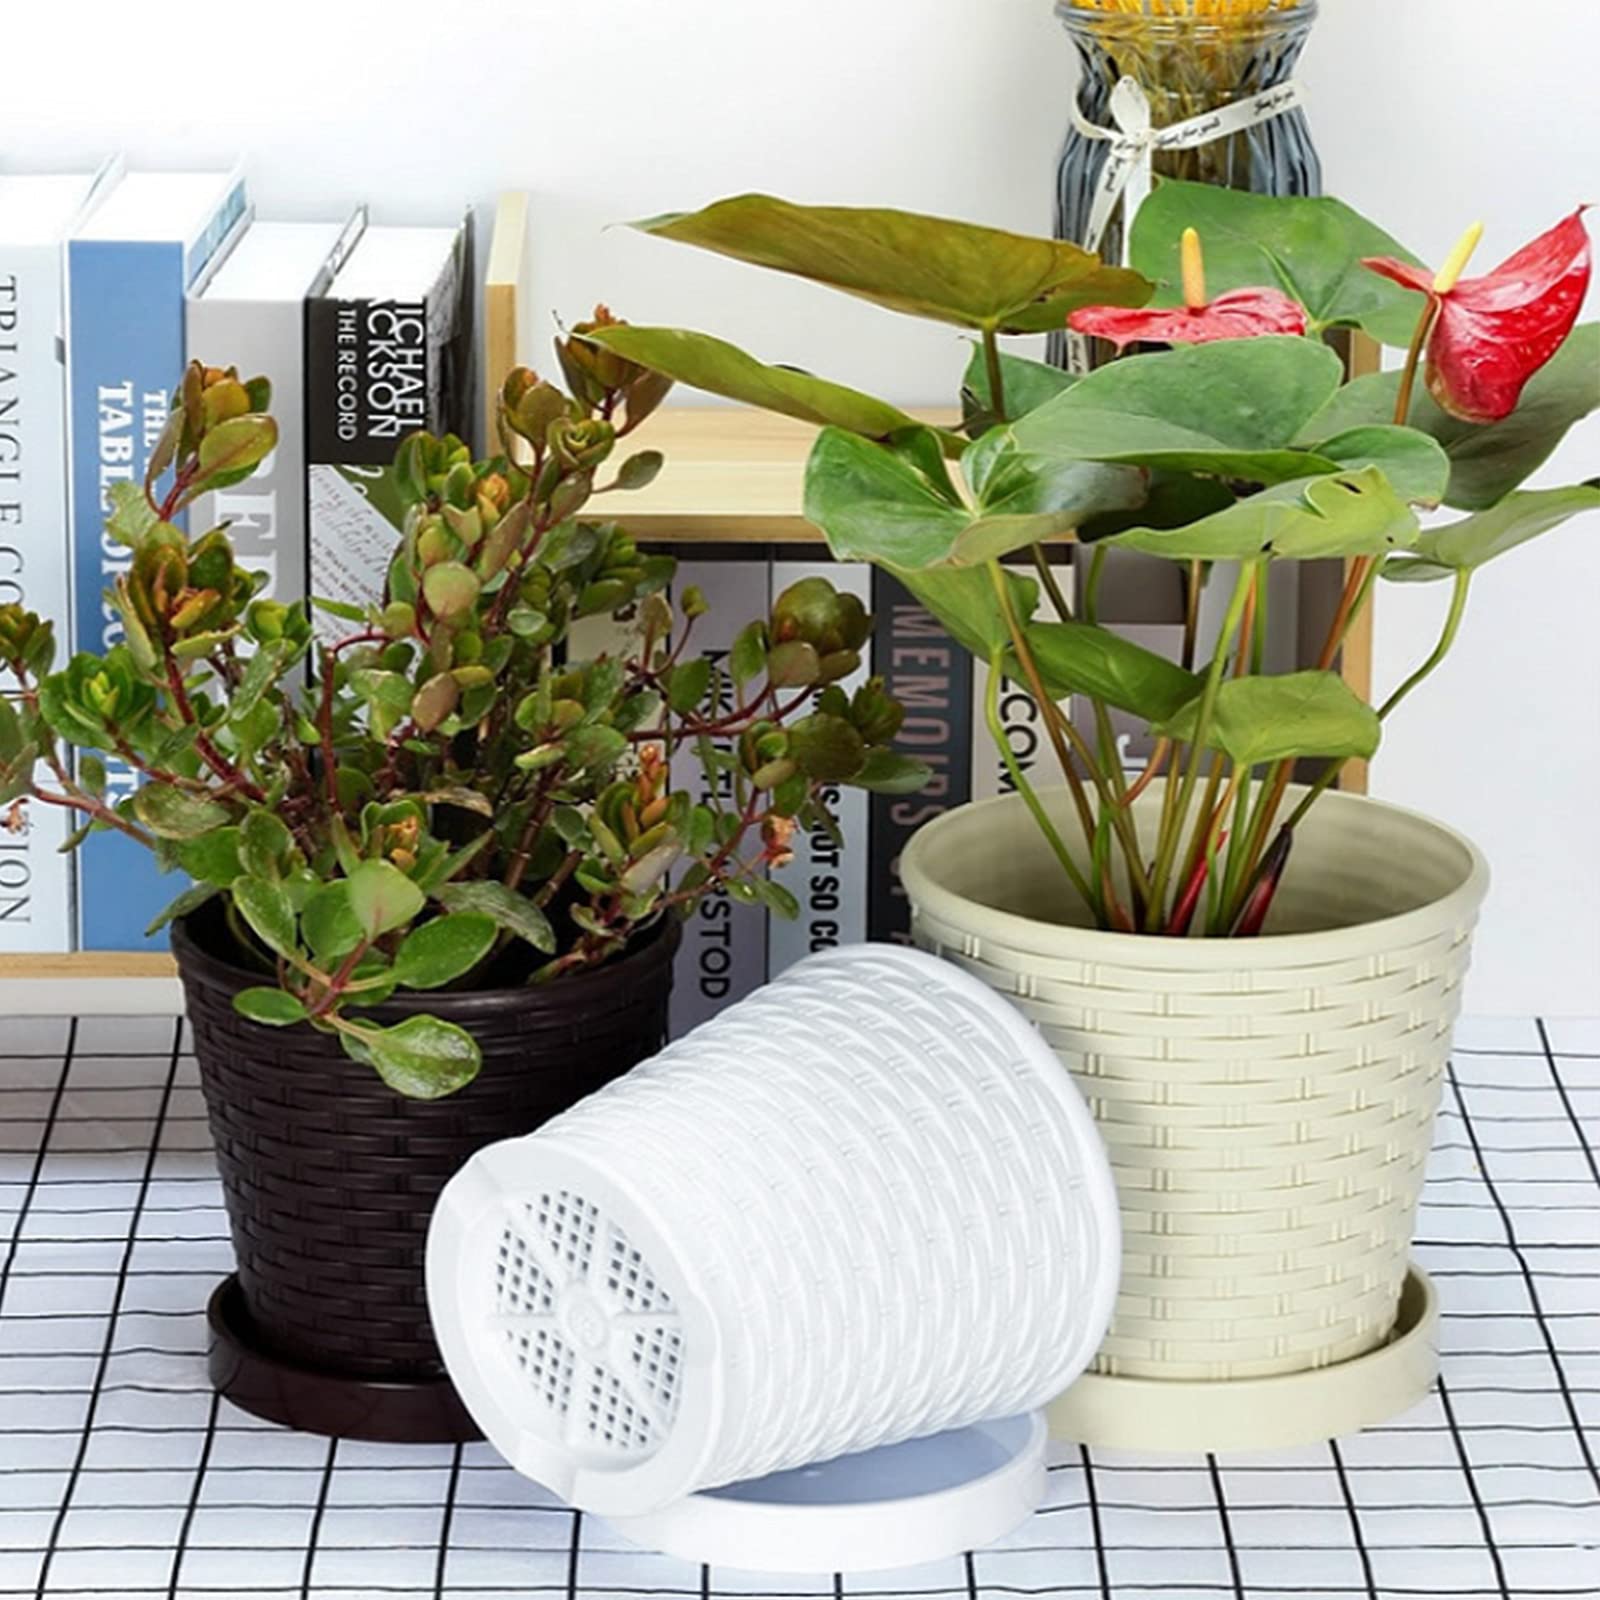 QLINDGK Bamboo Woven Plant Pot, Plastic Plant Pots with Drainage and Saucer Nursery Seedling Planter Garden Flower Pot Container for Indoor Outdoor Bonsai Plants